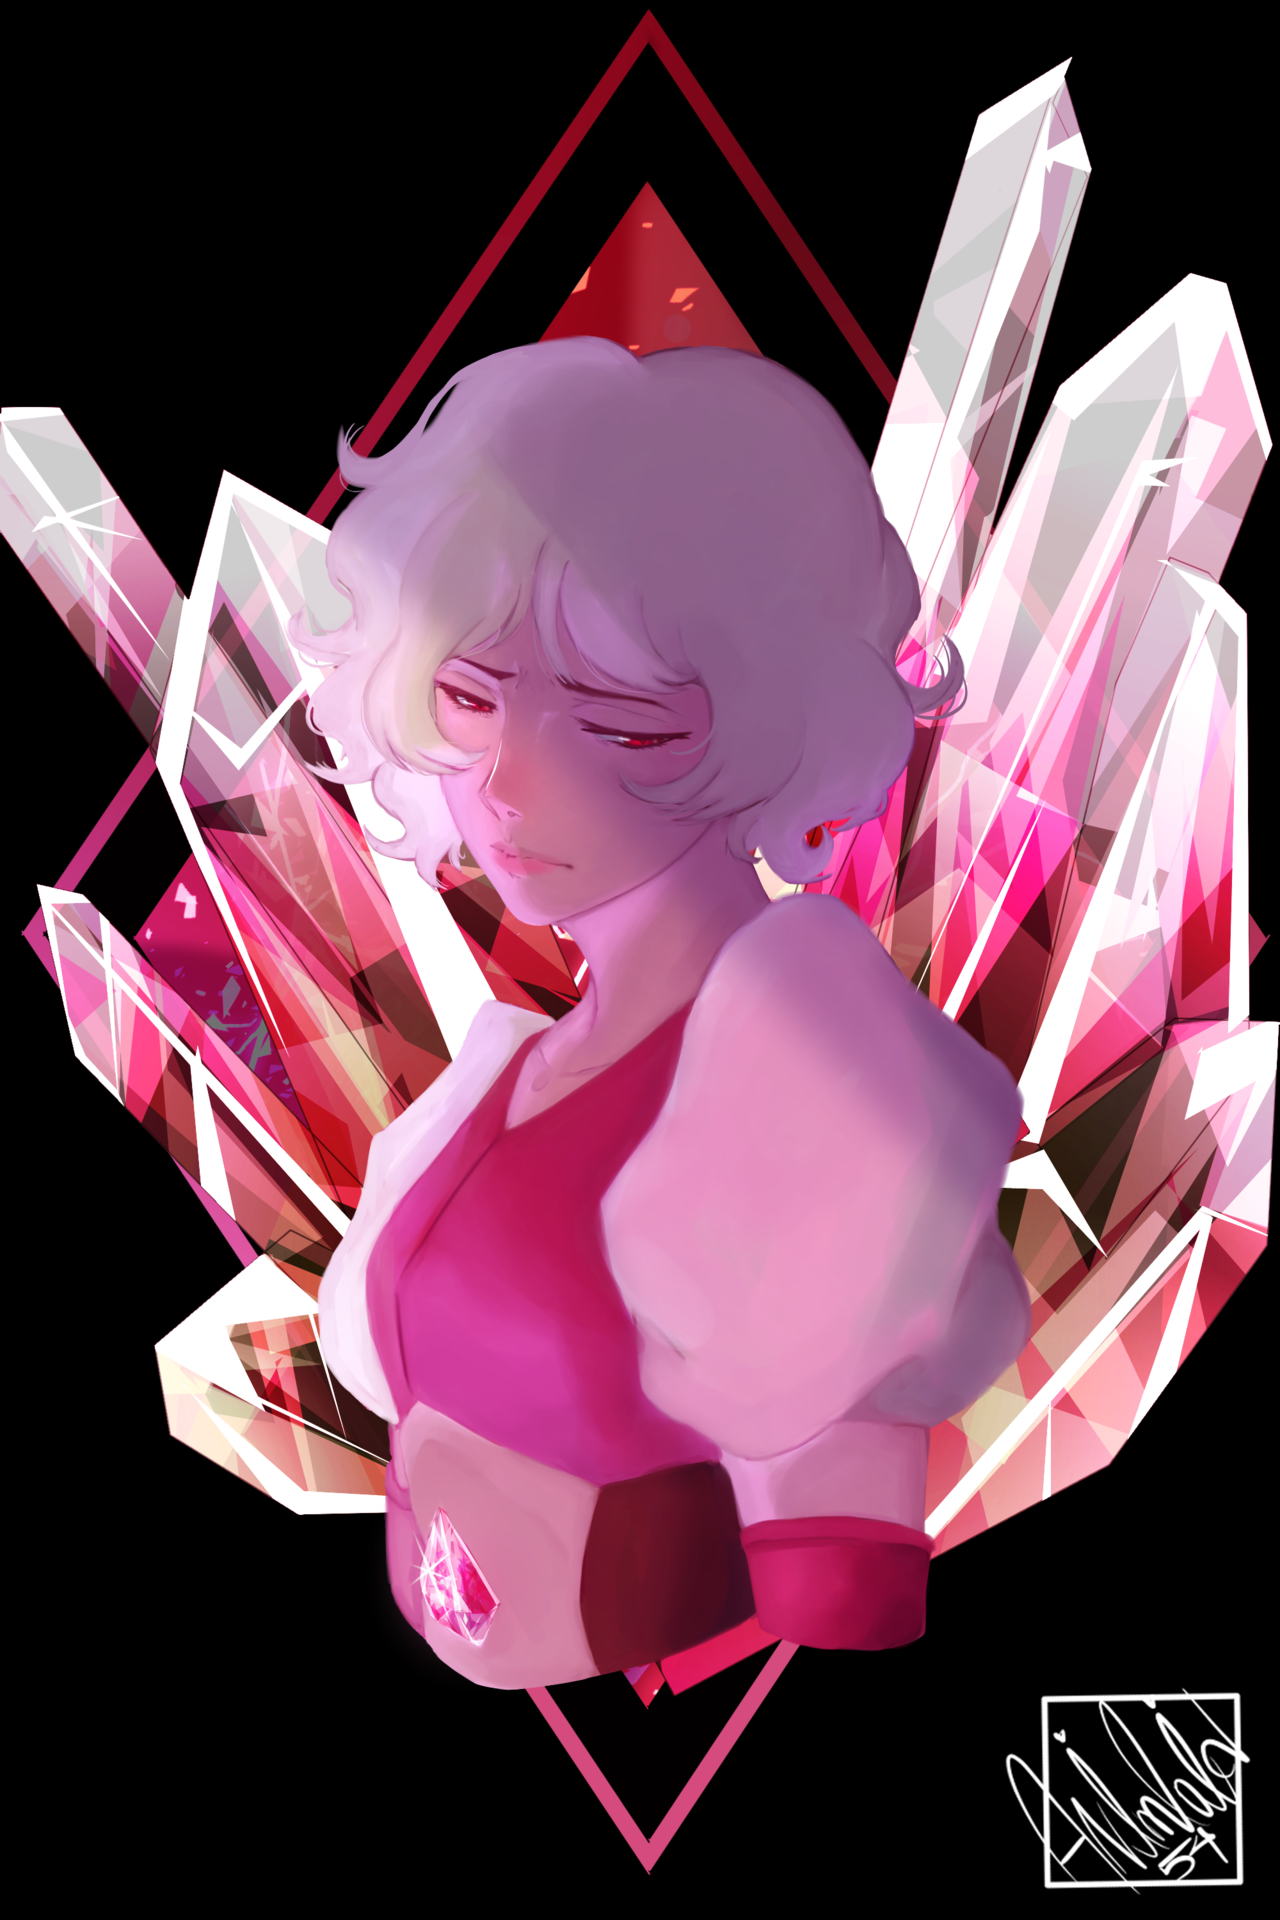 Steven Universe Pink Diamond Fanart. Man, I’ve been wanting to draw Pink Diamond since the episode of her reveal came out. I didn’t have time to paint the sketch that I had made of her at the time....